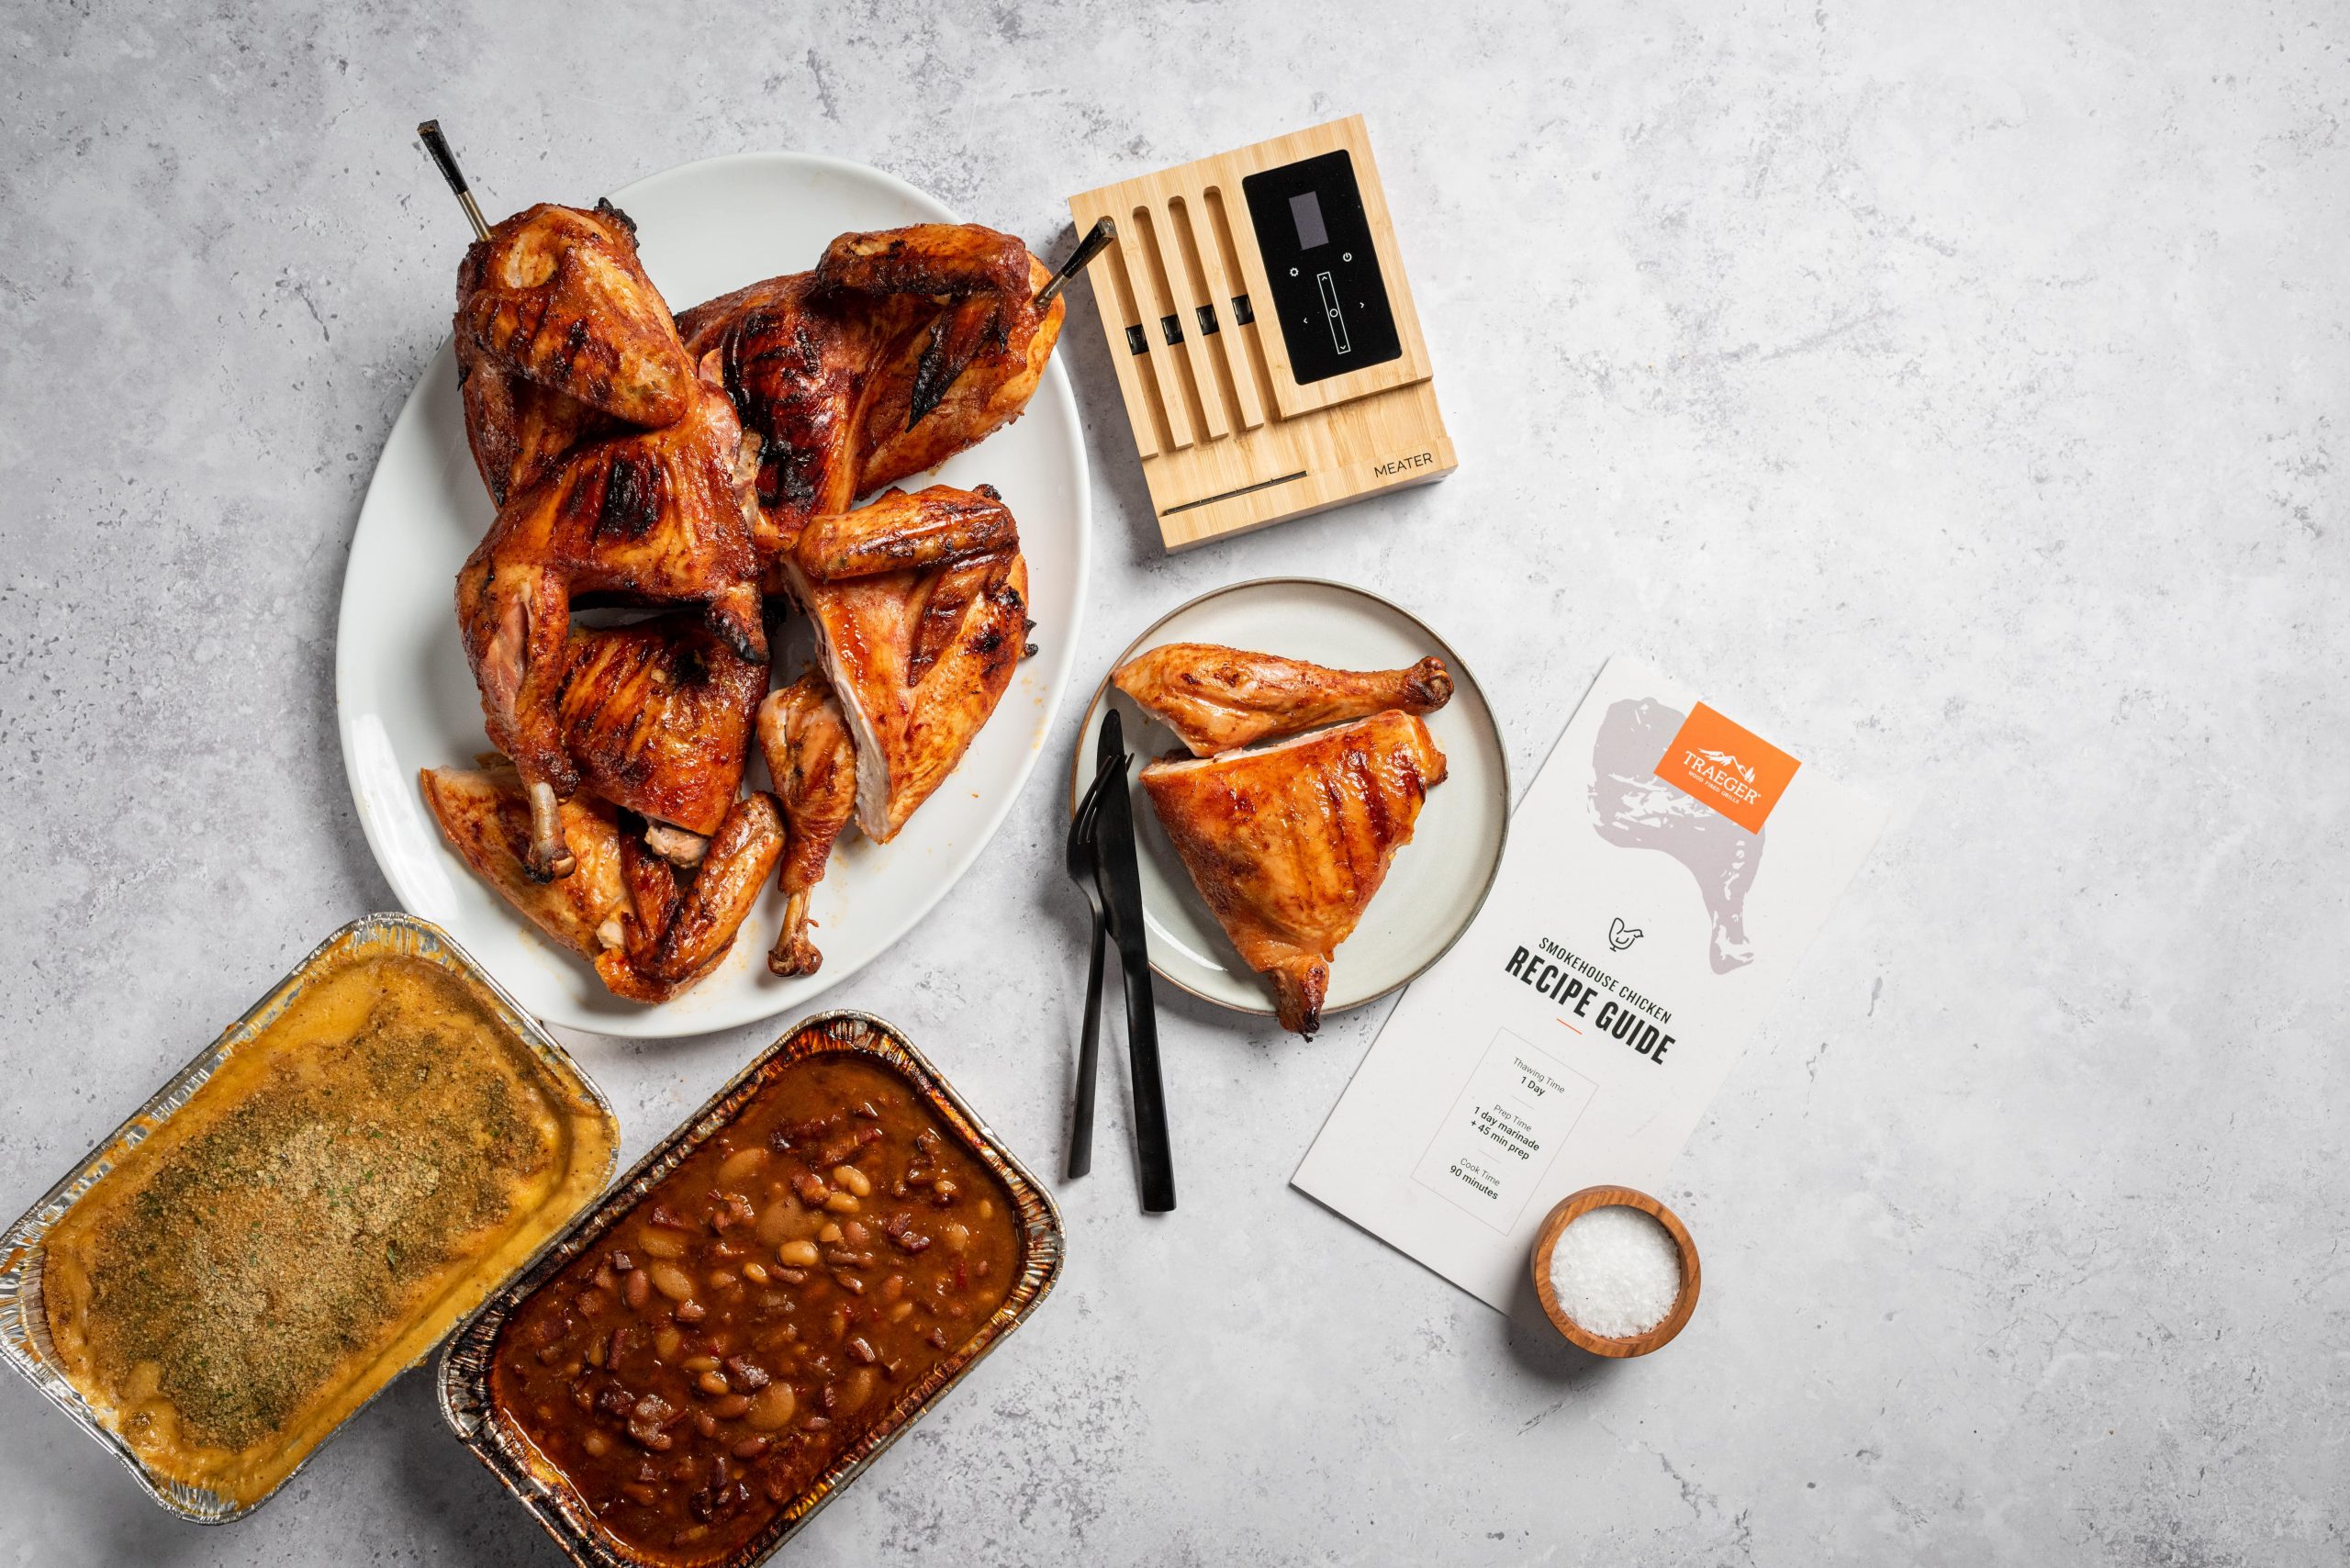 Maple Dijon Chicken  Traeger Provisions x MEATER - MEATER Blog